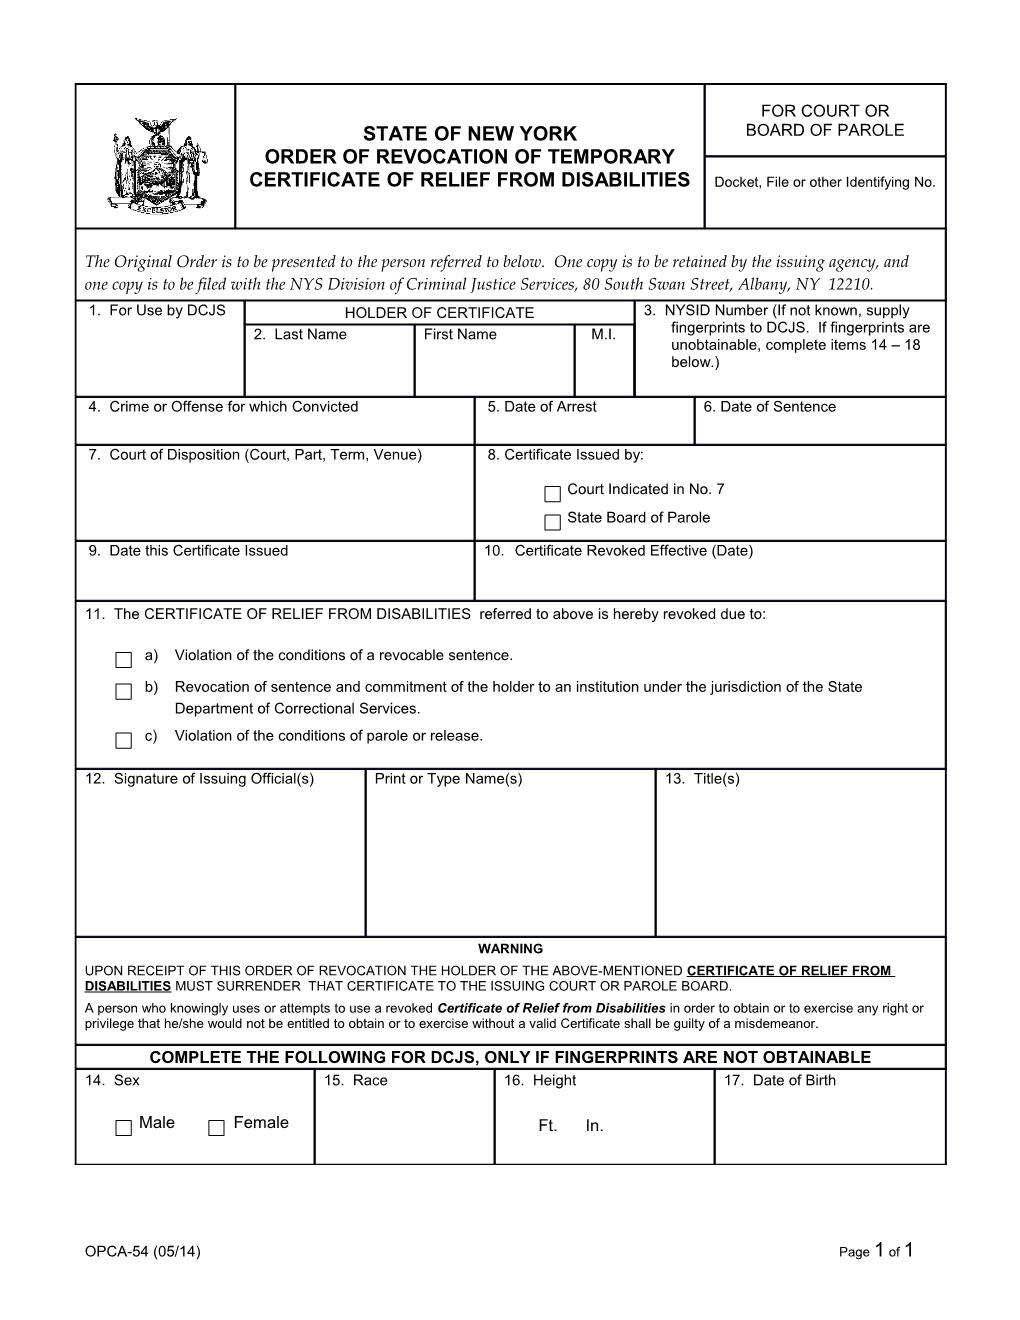 State of New York Order of Revocation of Temporary Certificate of Relief from Disabilities